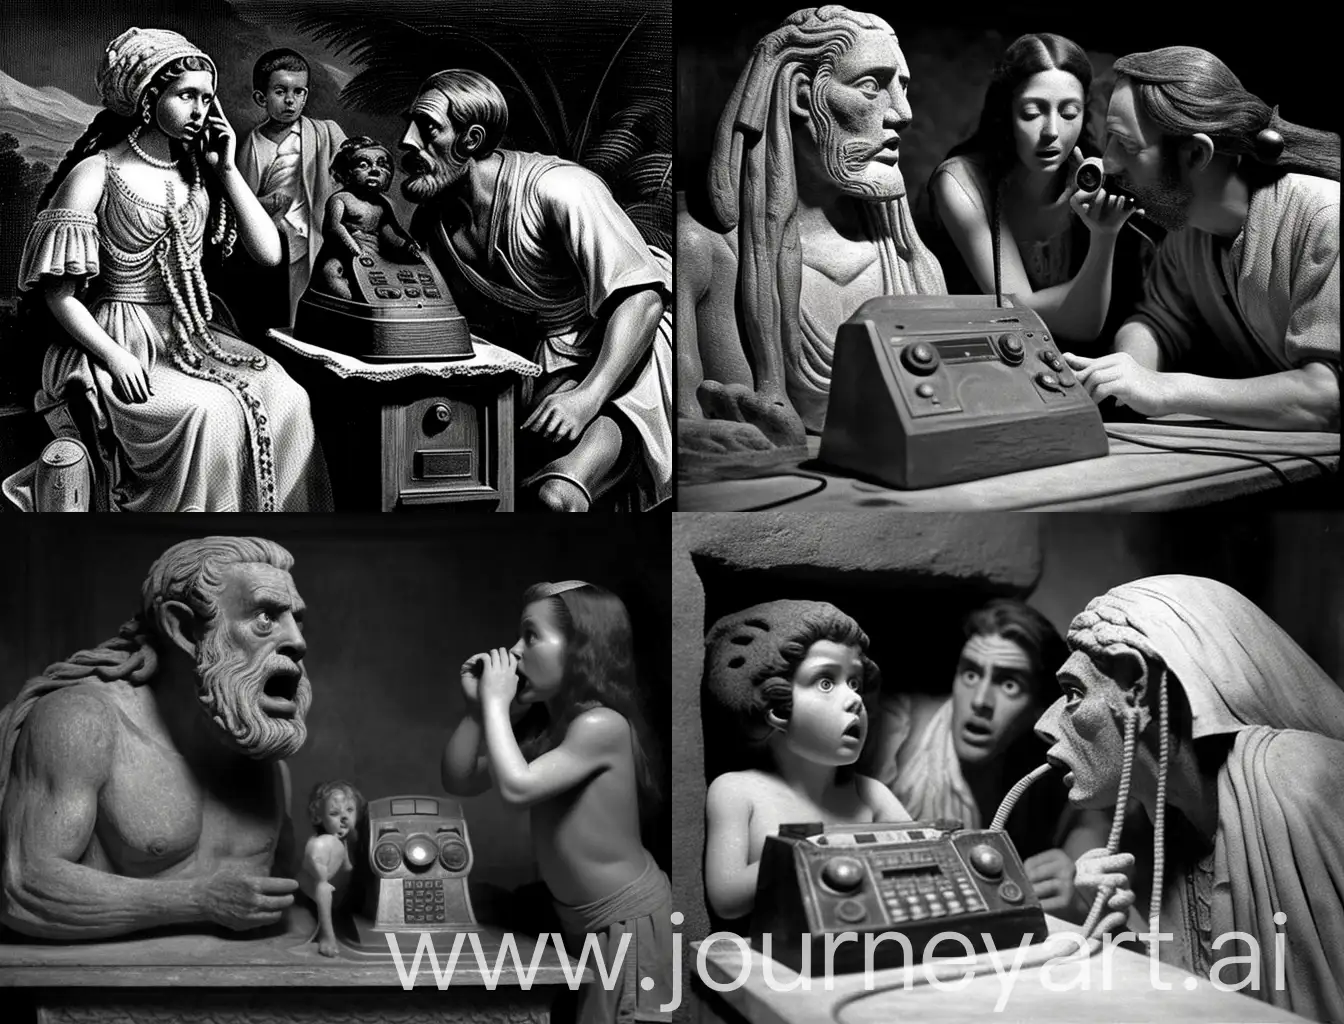 Black and white photograph depicting the moment when ancient people first discovered the telephone
